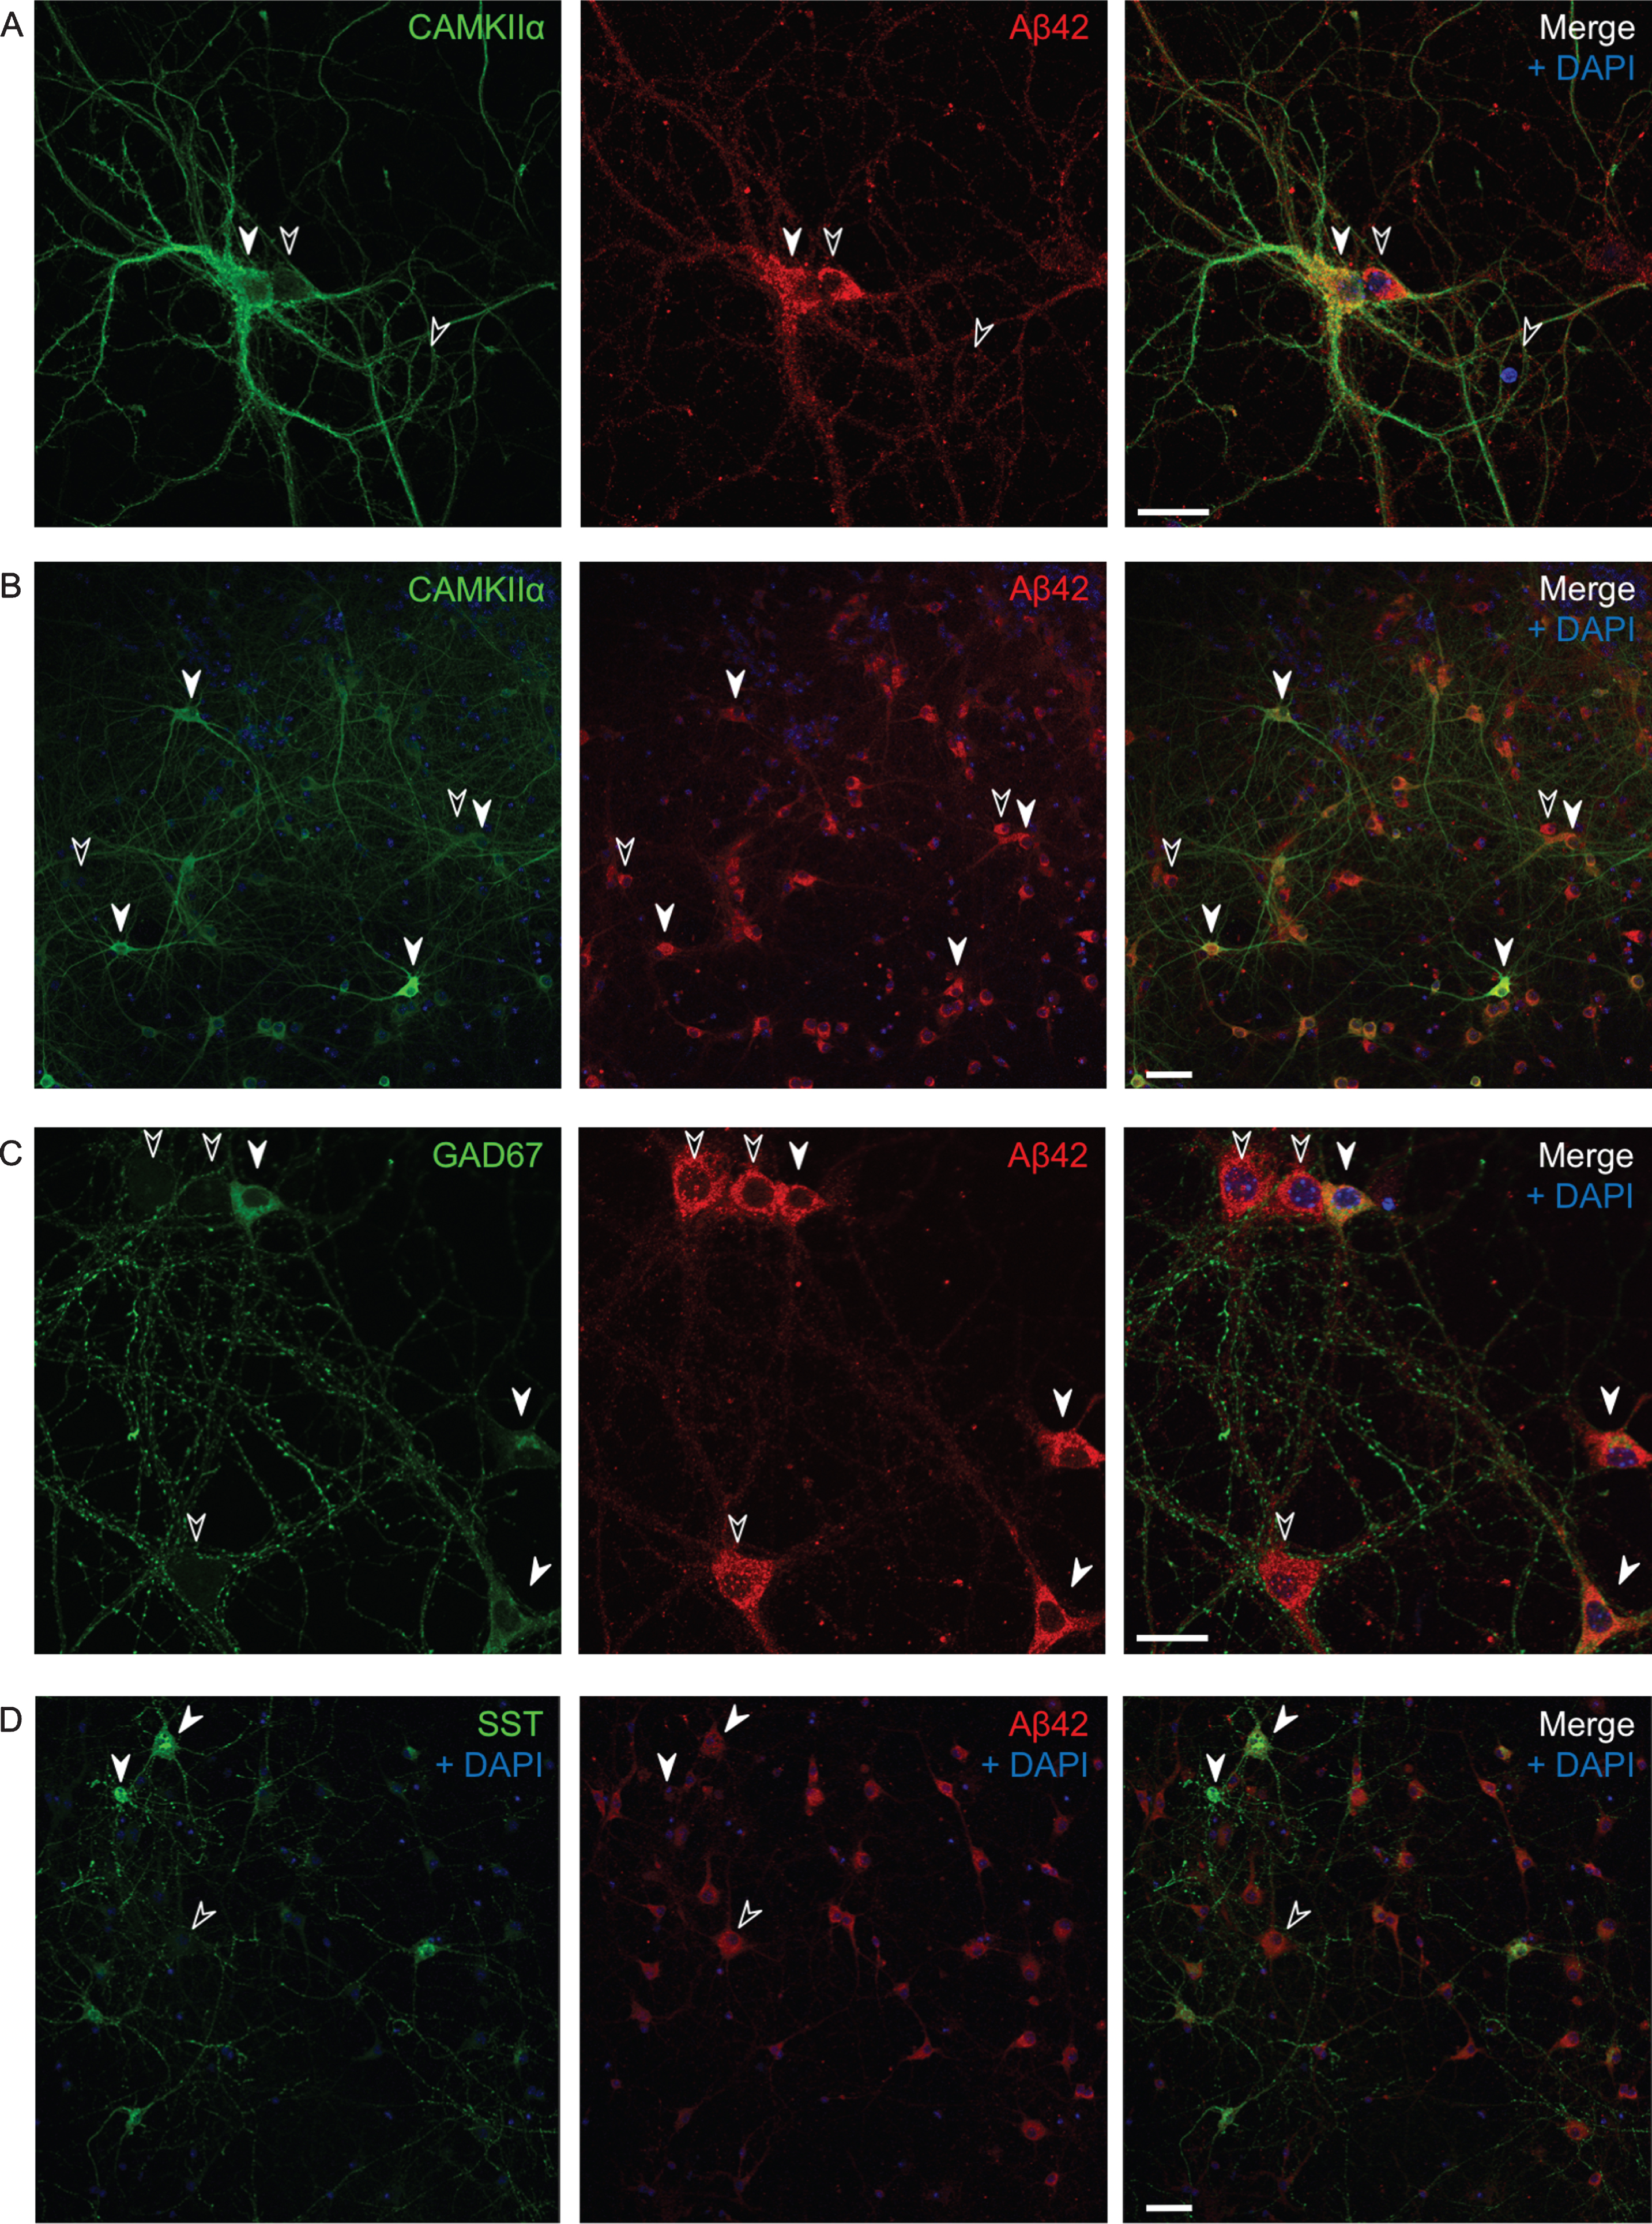 Varying endogenous Aβ42 levels in AβPP/PS1 primary neurons in culture. Immunofluorescent labeling of AβPP/PS1 primary neurons. A, B) All CAMKIIα-positive cells (white filled arrows) have high levels of Aβ1 - 42; however, so do many, but not all, CAMKIIα-negative cells as well (black arrows). Also note that the two side by side neurons in (A) with varying levels of CAMKIIα (the positive to the left and the negative to the right) have comparable high levels of Aβ1 - 42. C, D) Many GAD67-positive neurons show high levels of Aβ42 (C), however, some somatostatin positive cells have lower levels of Aβ42 (D). Scale bars 25 μm (A and C) and 50 μm (B and D).